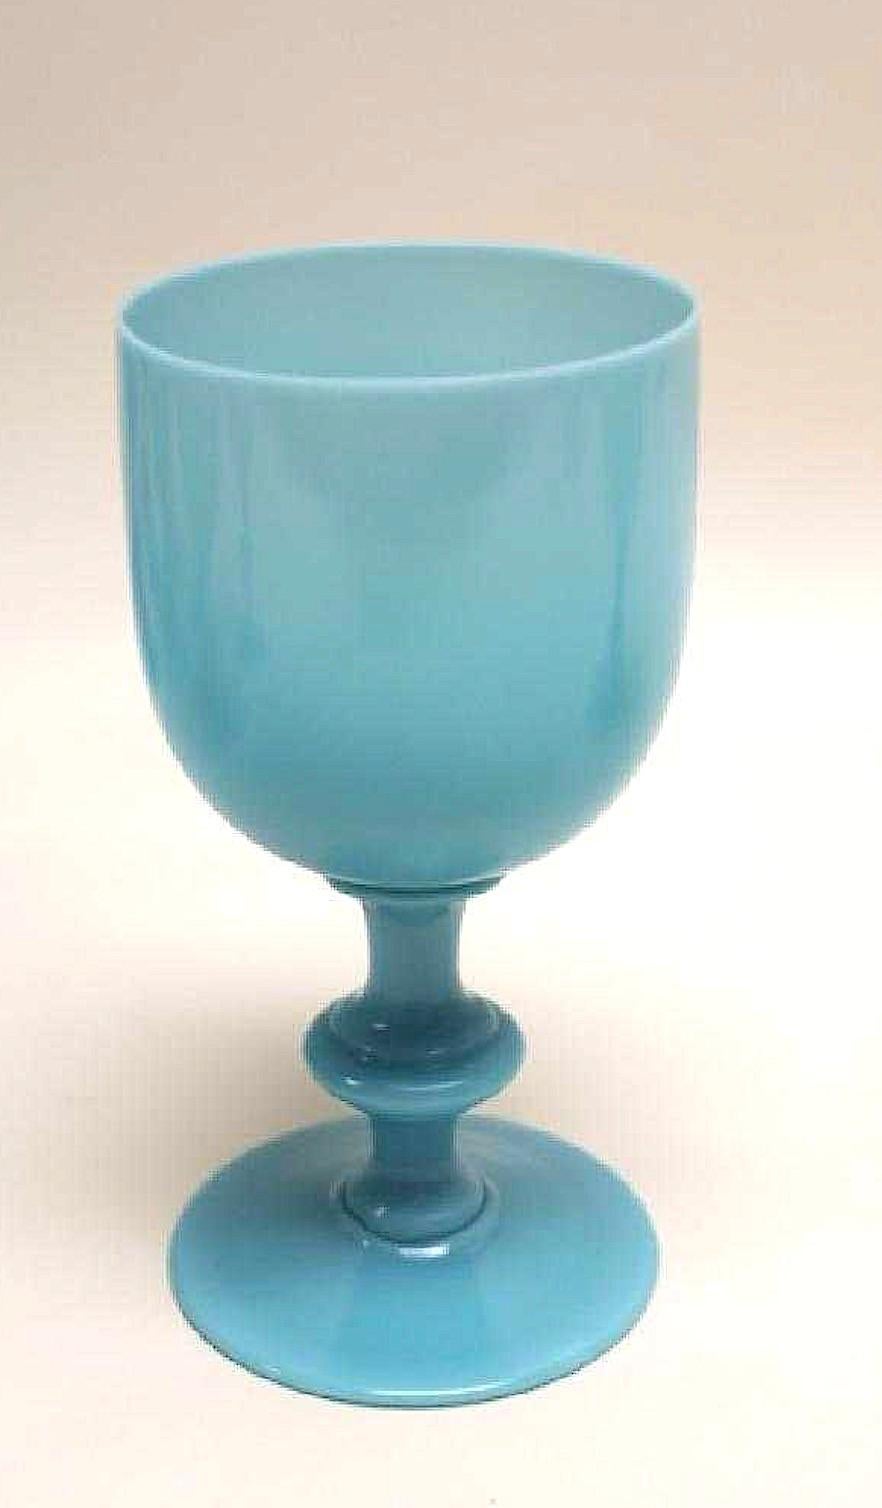 A hard to find beautiful large set of ten, circa 1930.
An Oil Tycoon's set of ten gorgeous French turquoise blue opaline large Goblets Stemware by Portieux Vallerysthal.
The glasses create a beautiful table setting for your most outstanding artful